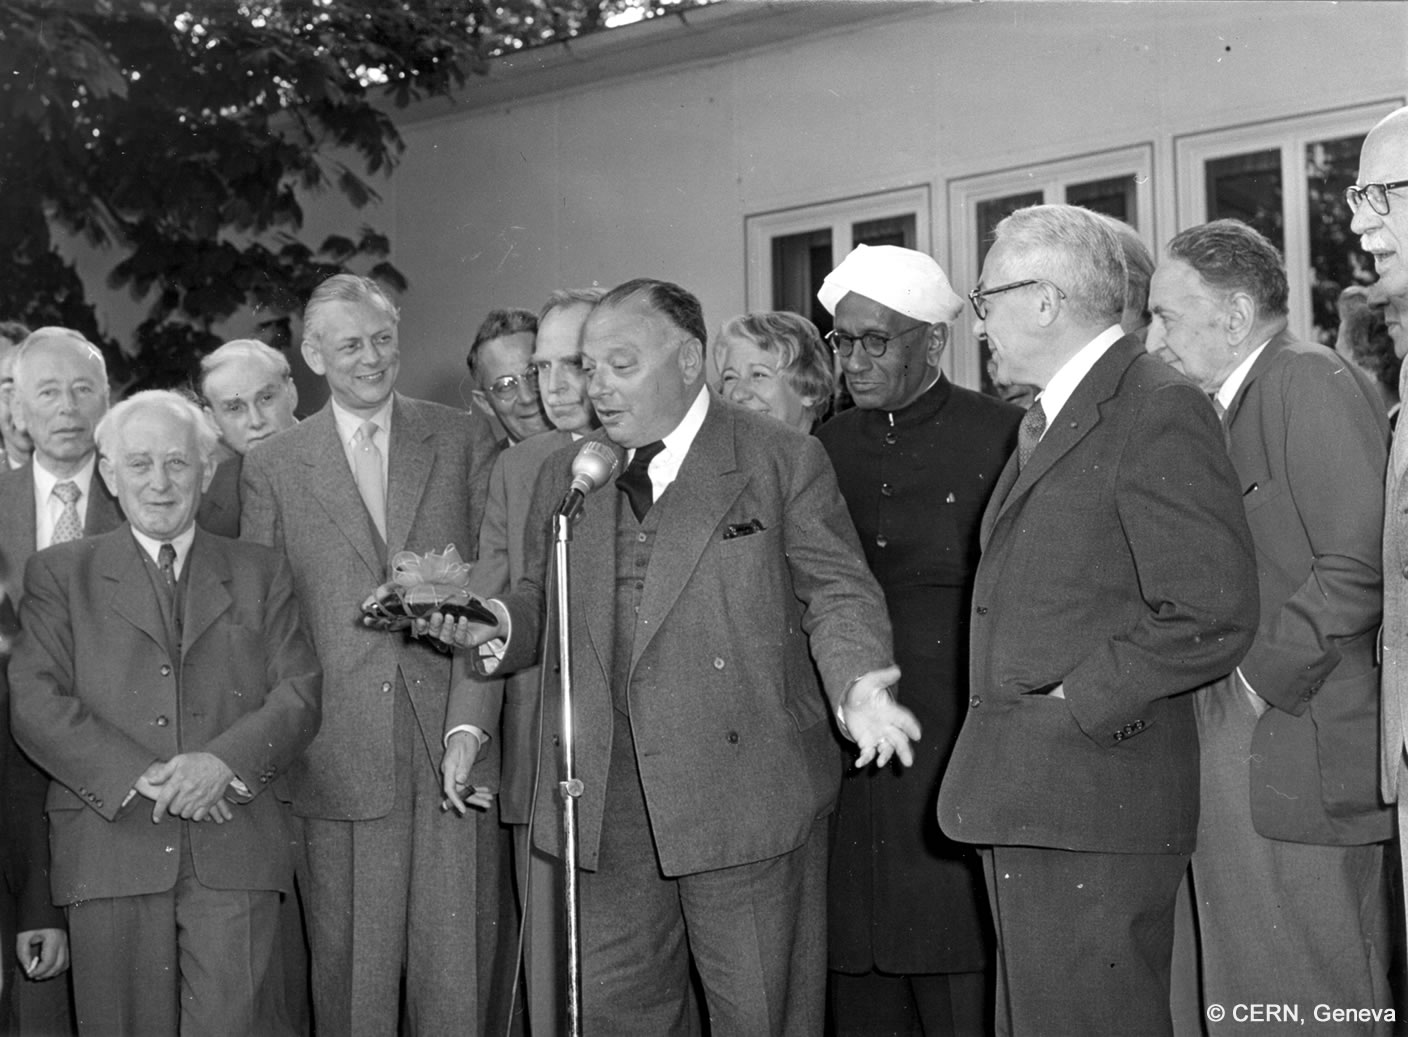 Wolfgang Pauli stands speaking in front of a microphone, behind him are men